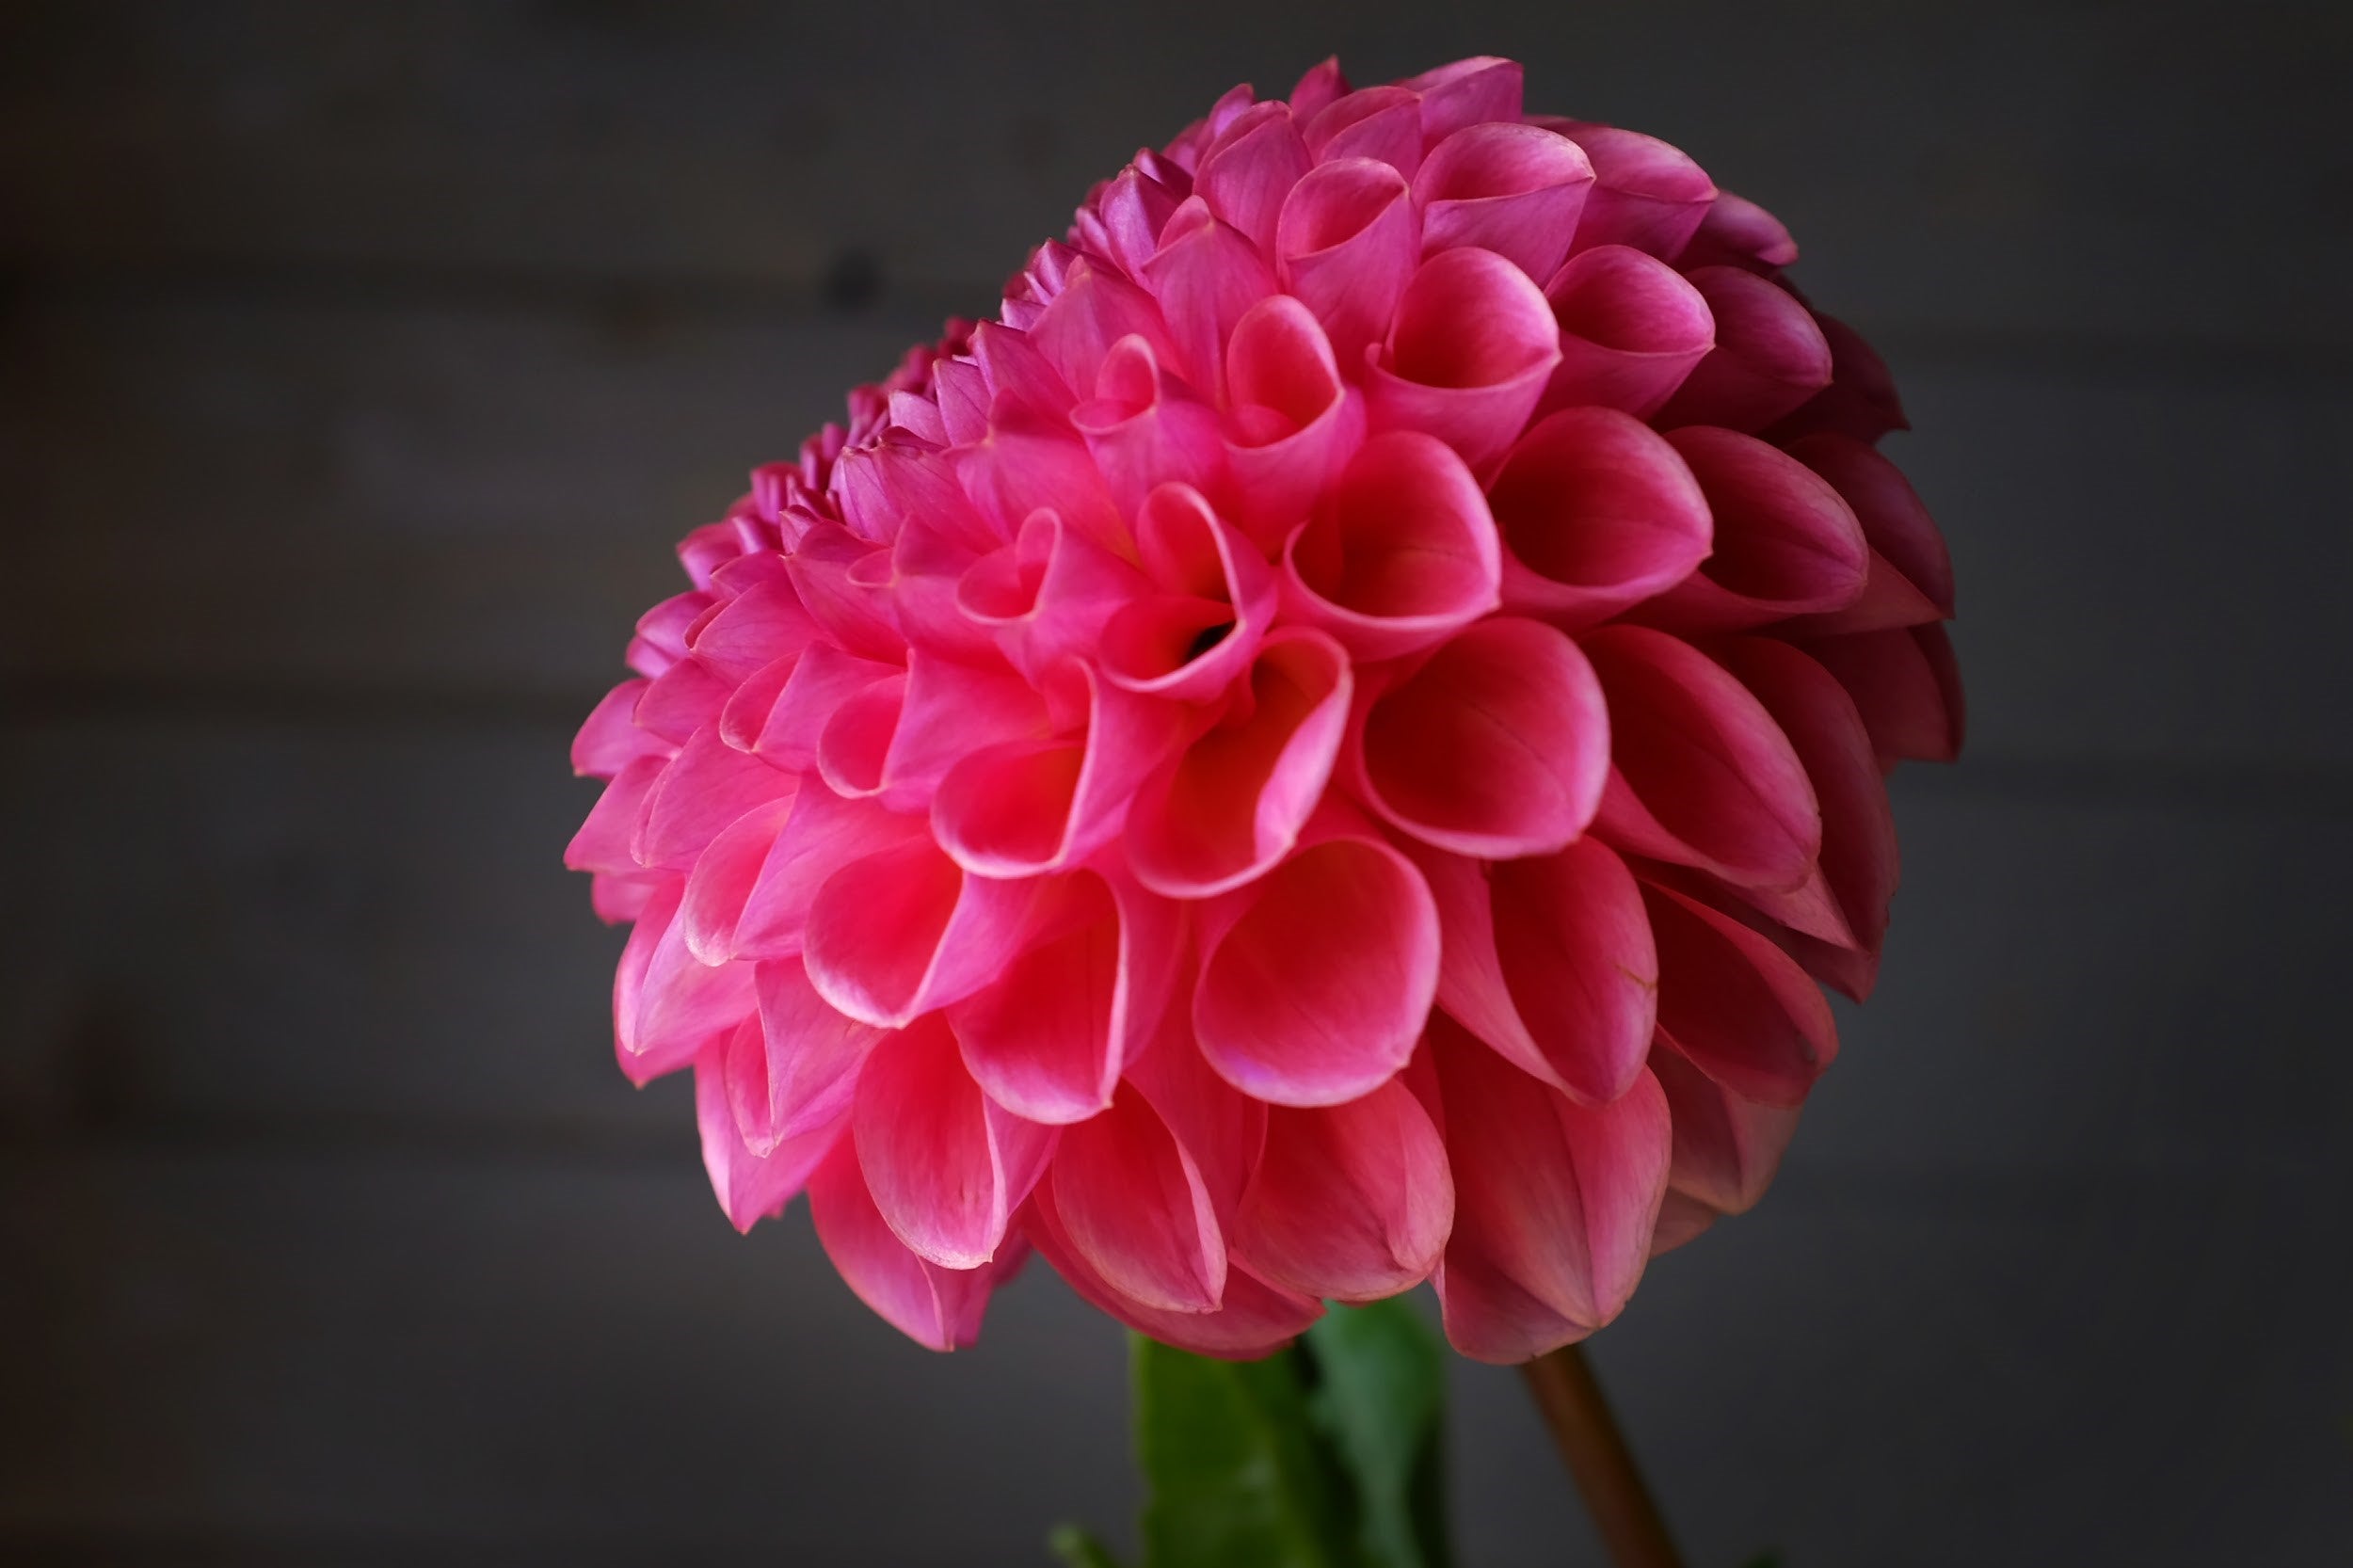 Coral pink and mauve Dahlia Tuber